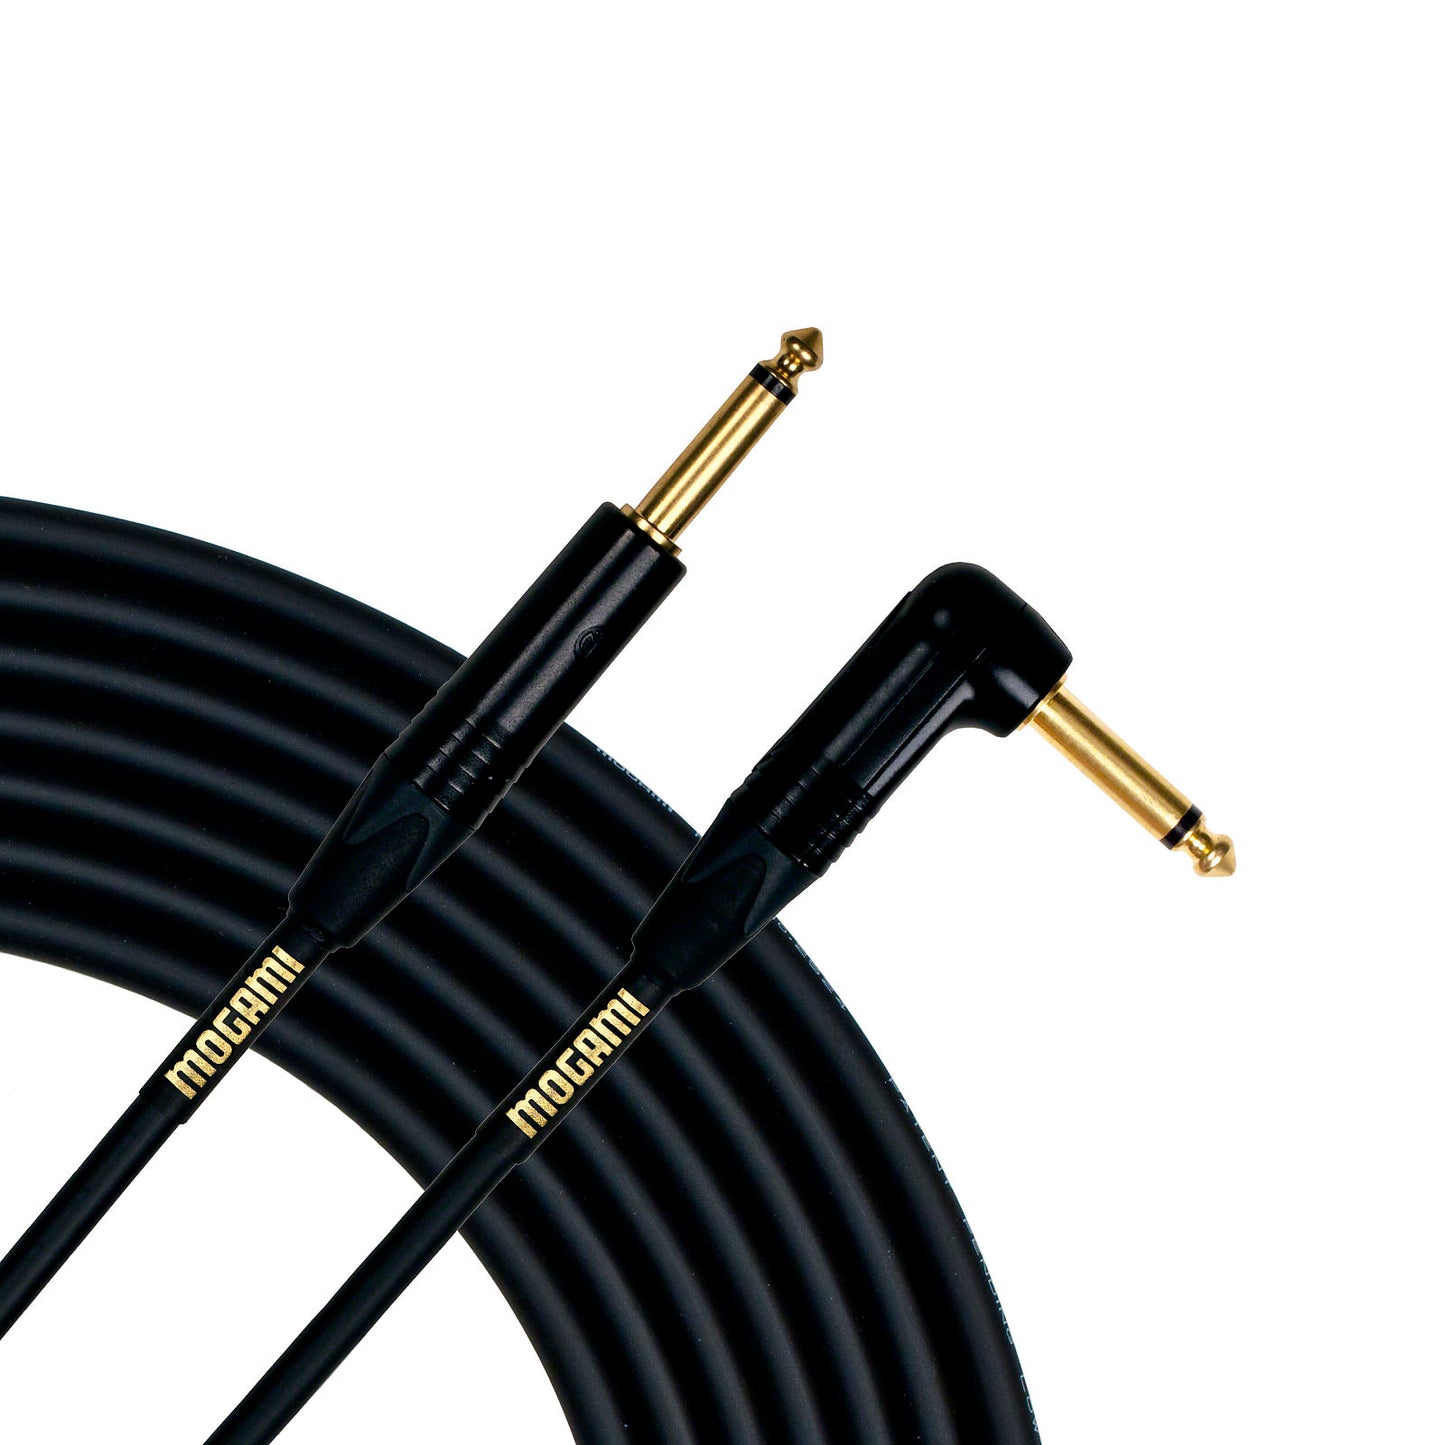 Mogami Gold Guitar/Instrument Cable (Straight to Right Angle End), 25 Foot